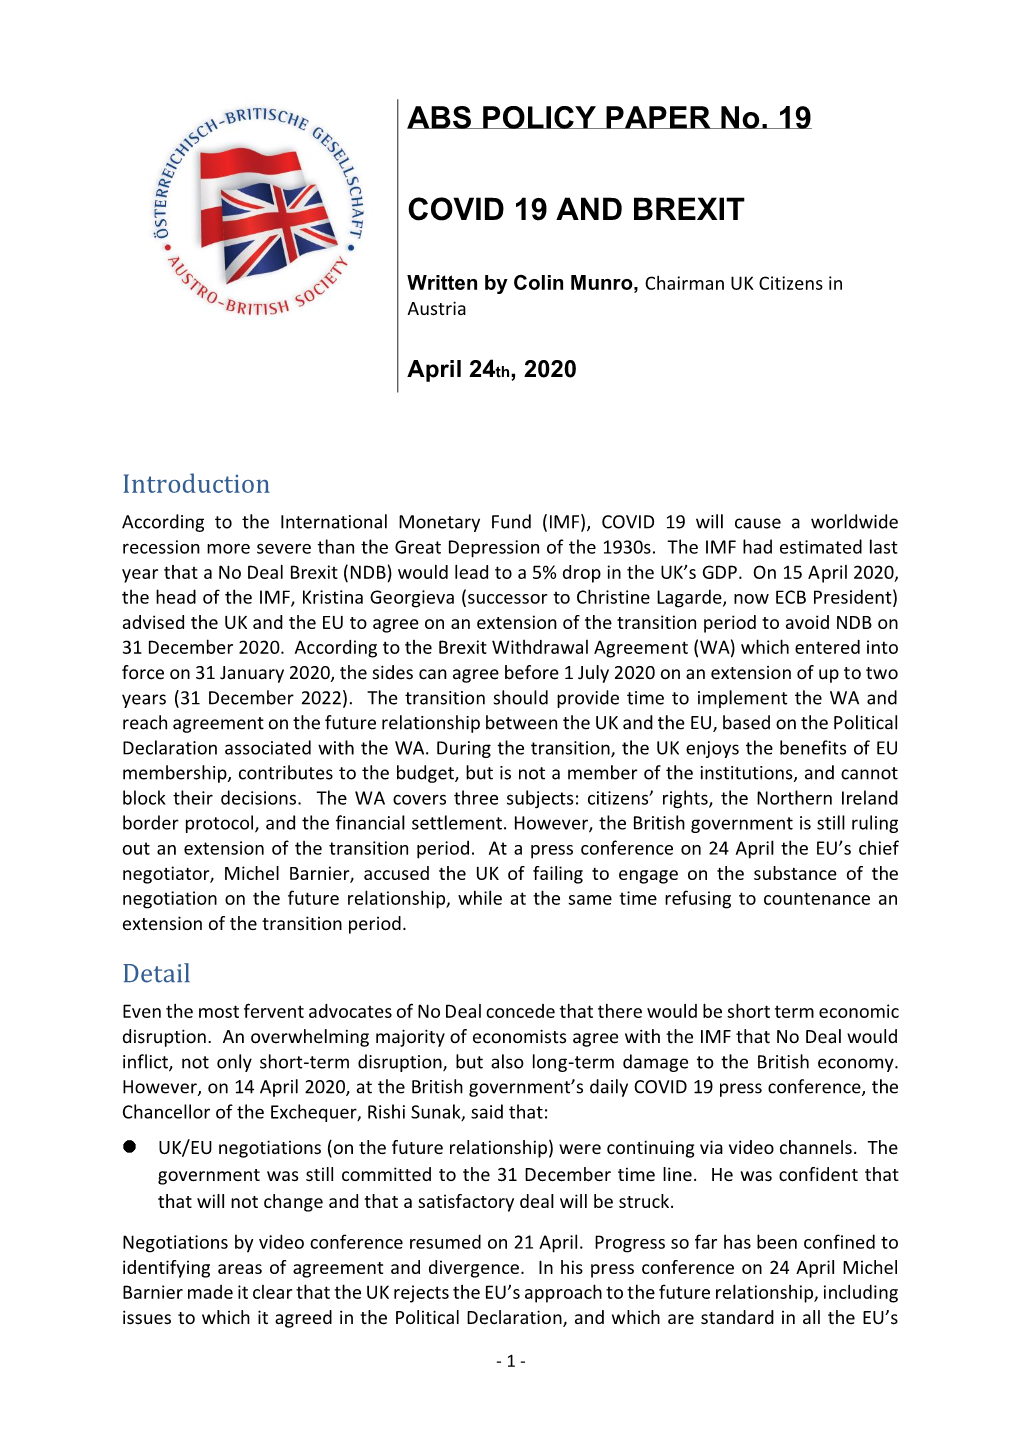 ABS POLICY PAPER No. 19 COVID 19 and BREXIT